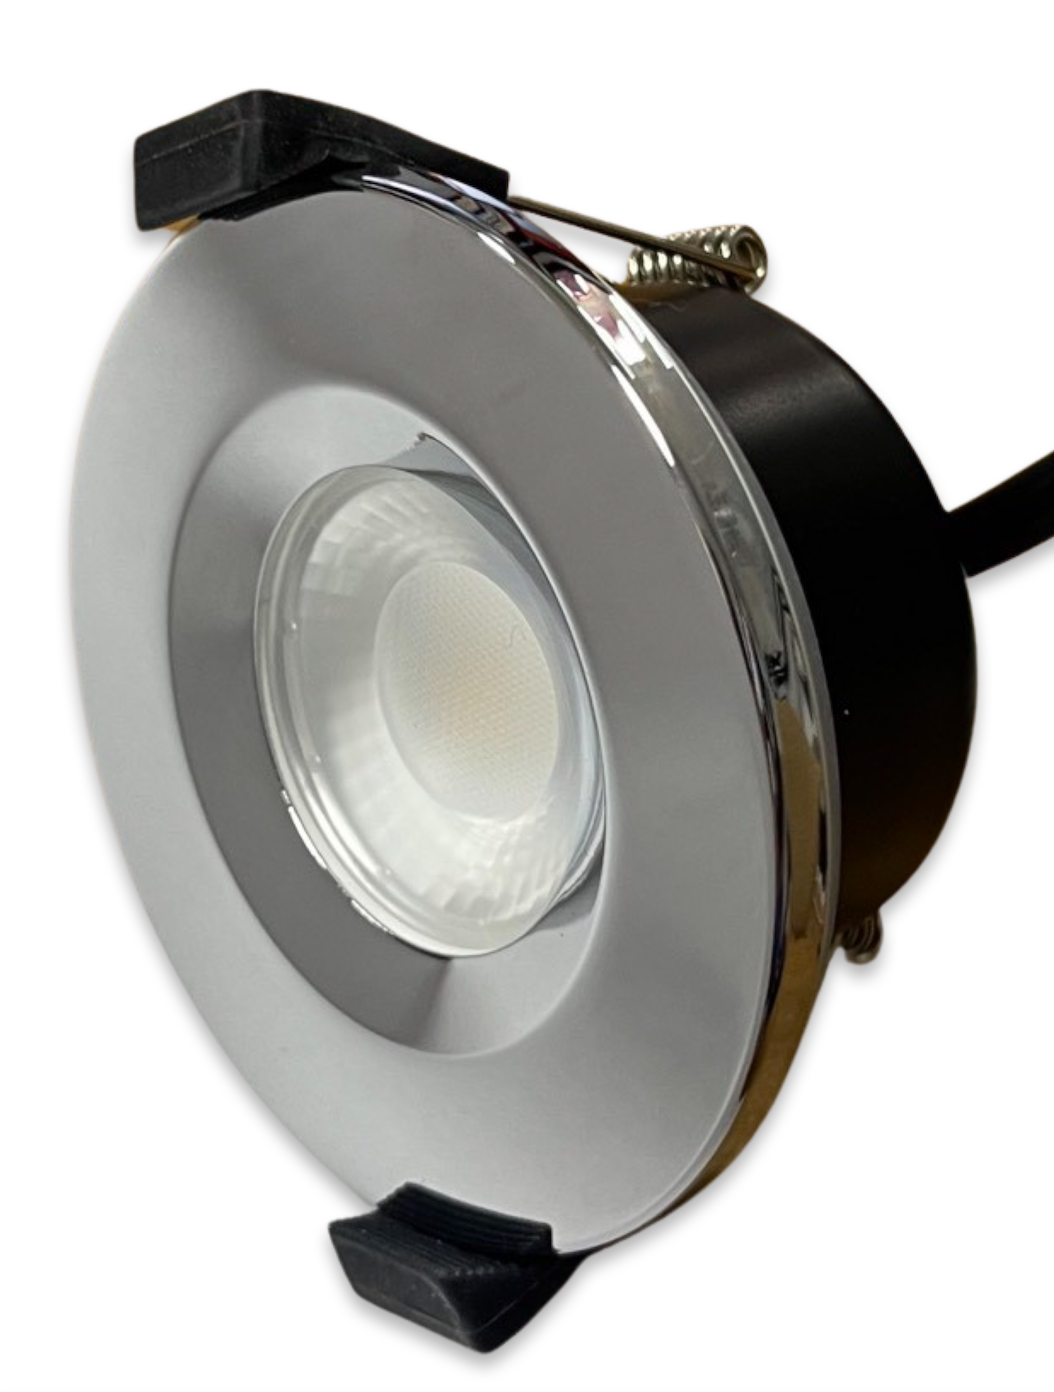 Chrome Waterproof Fire Rated Dimmable Downlight Ceiling IP65 - Light fixtures UK